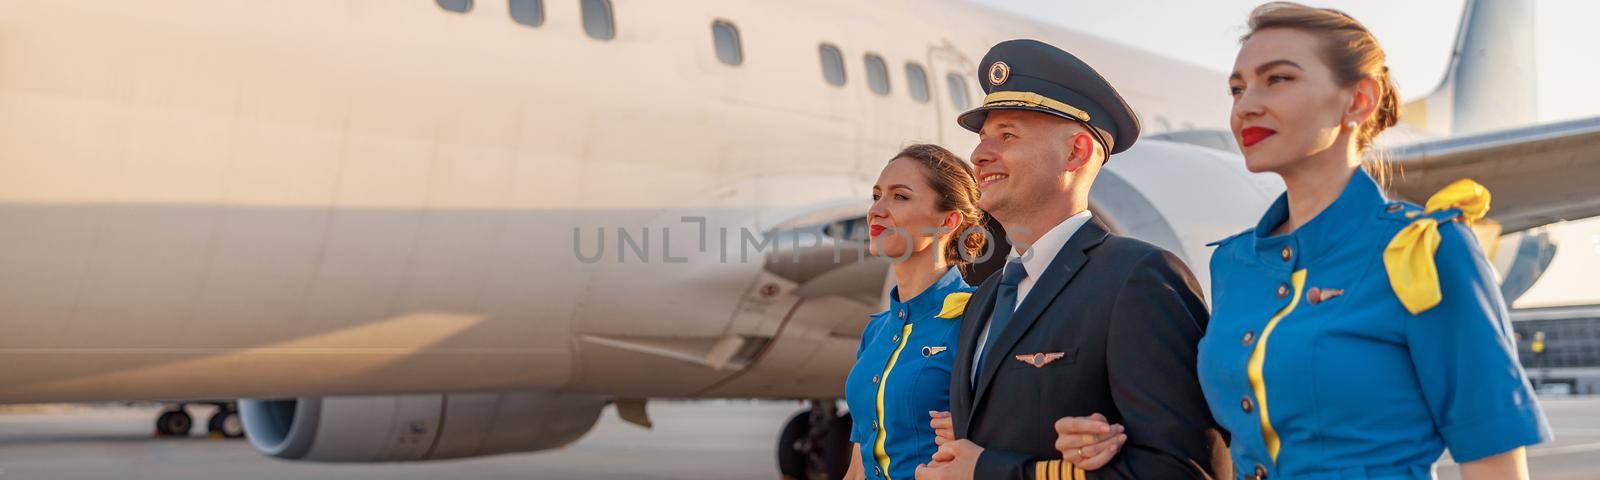 Excited male pilot walking together with two flight attendants in blue uniform in front of an airplane in terminal at sunset by Yaroslav_astakhov